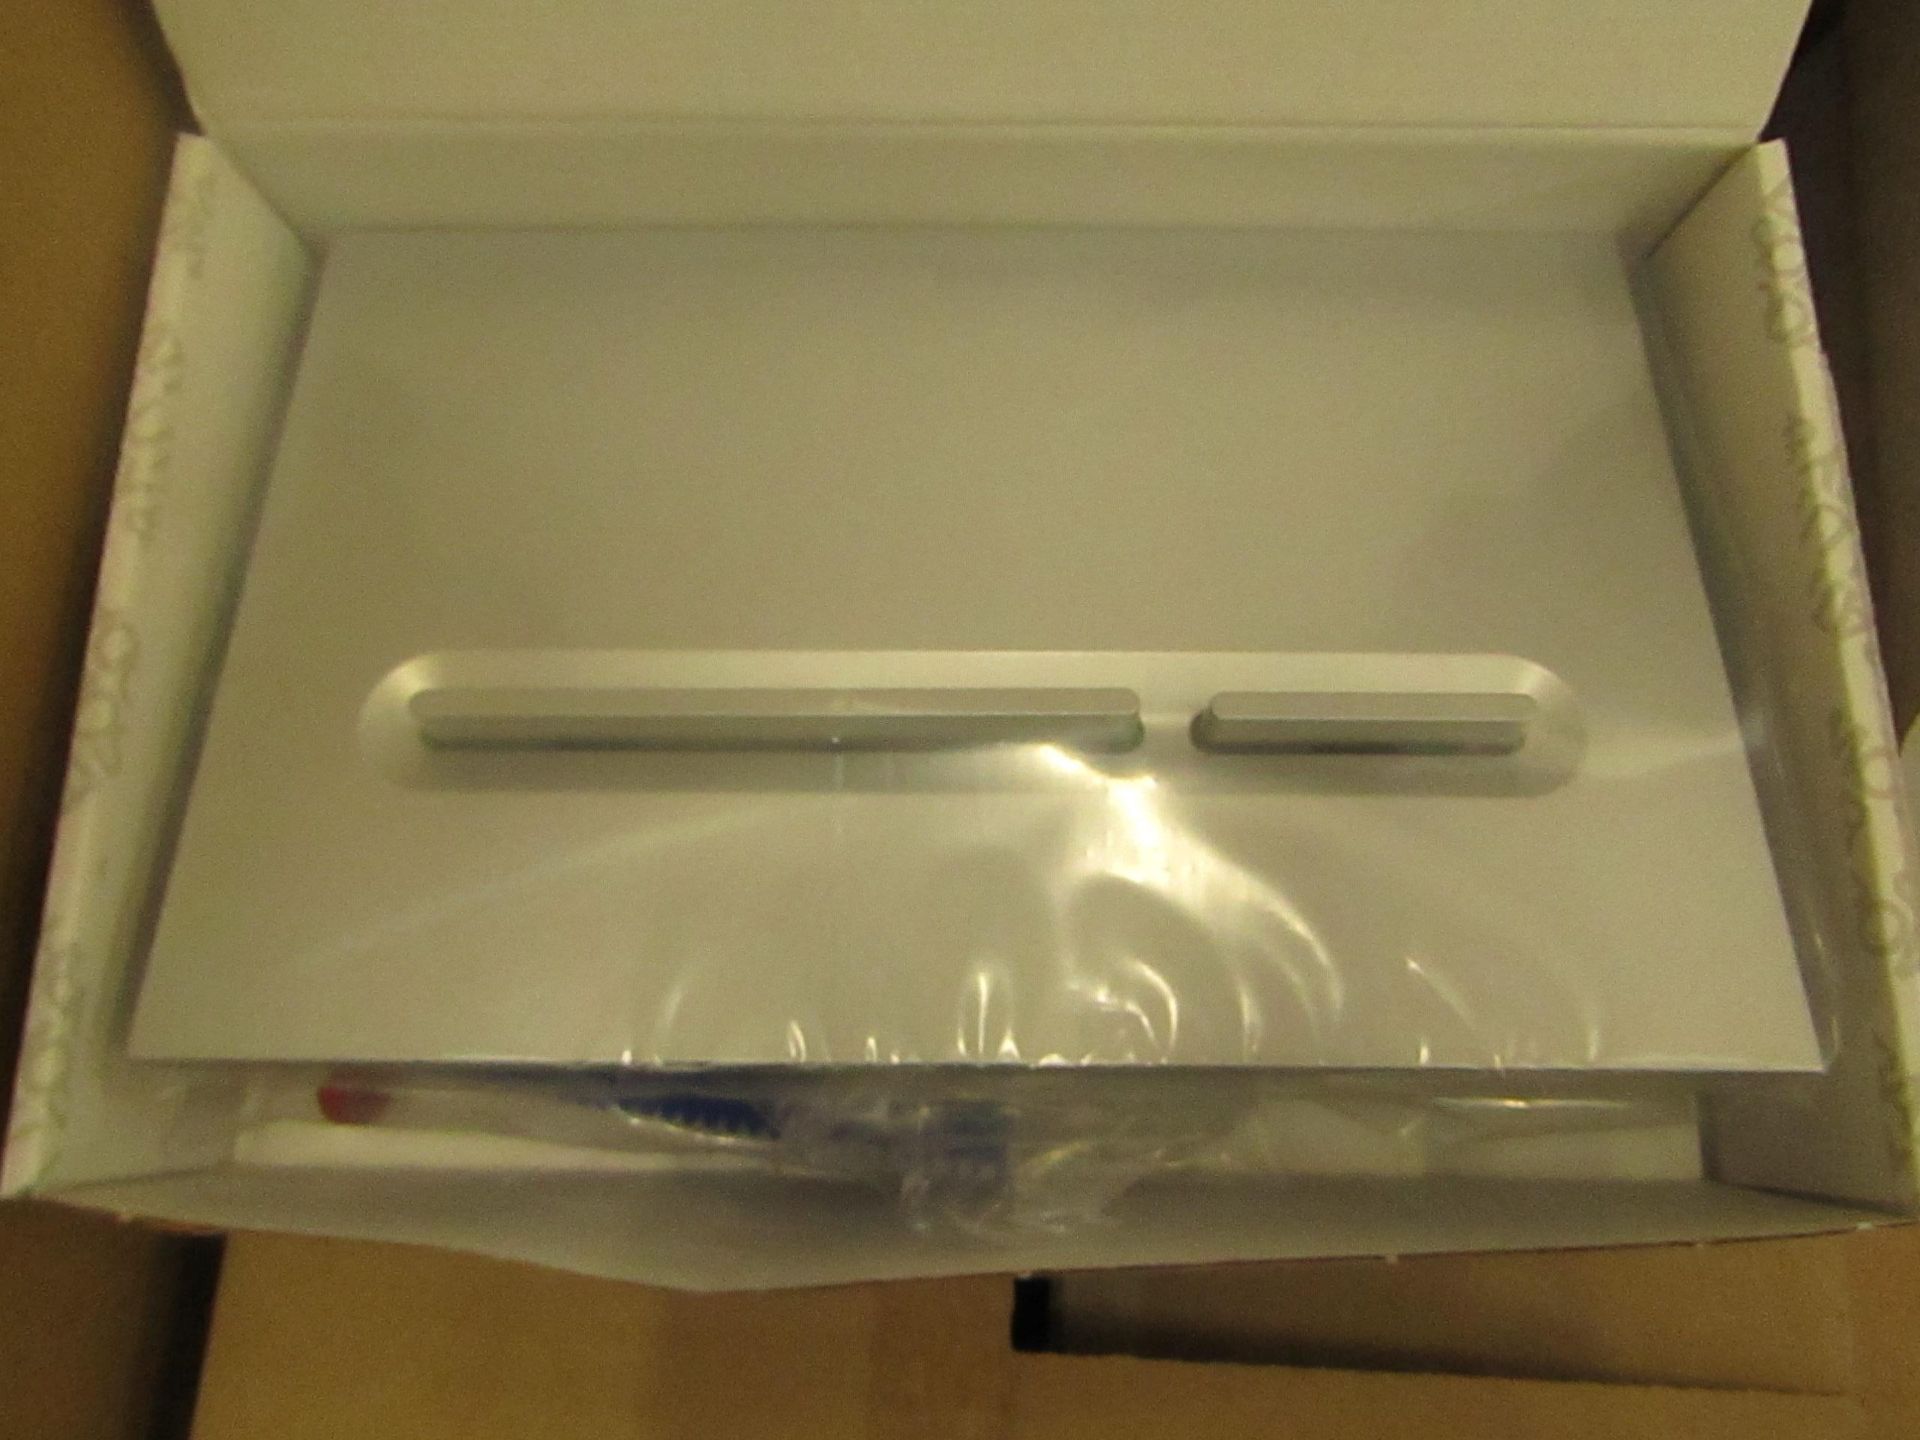 Roca PL5 grey lacquered Dual Flush plate, new and boxed.